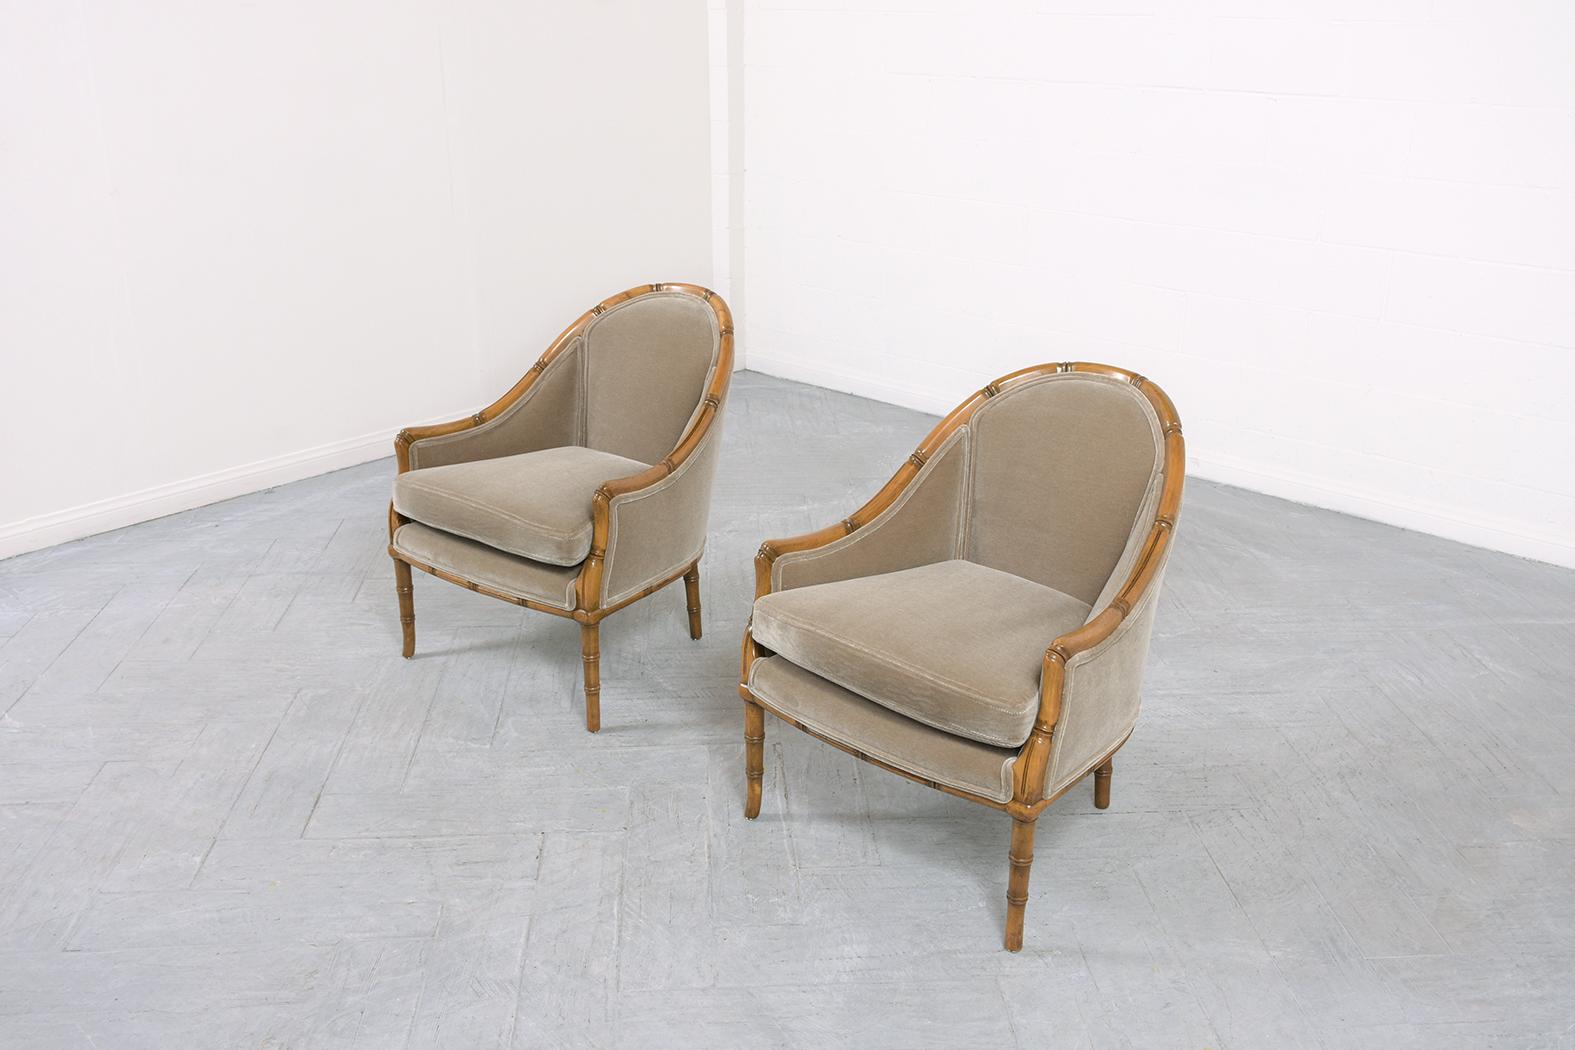 This extraordinary pair of elegant vintage lounge chairs are in great condition, hand-crafted out of solid wood, and has been professionally restored refinished, & upholstered by our expert craftsmen team. This fabulous 1960s set of two Chinese